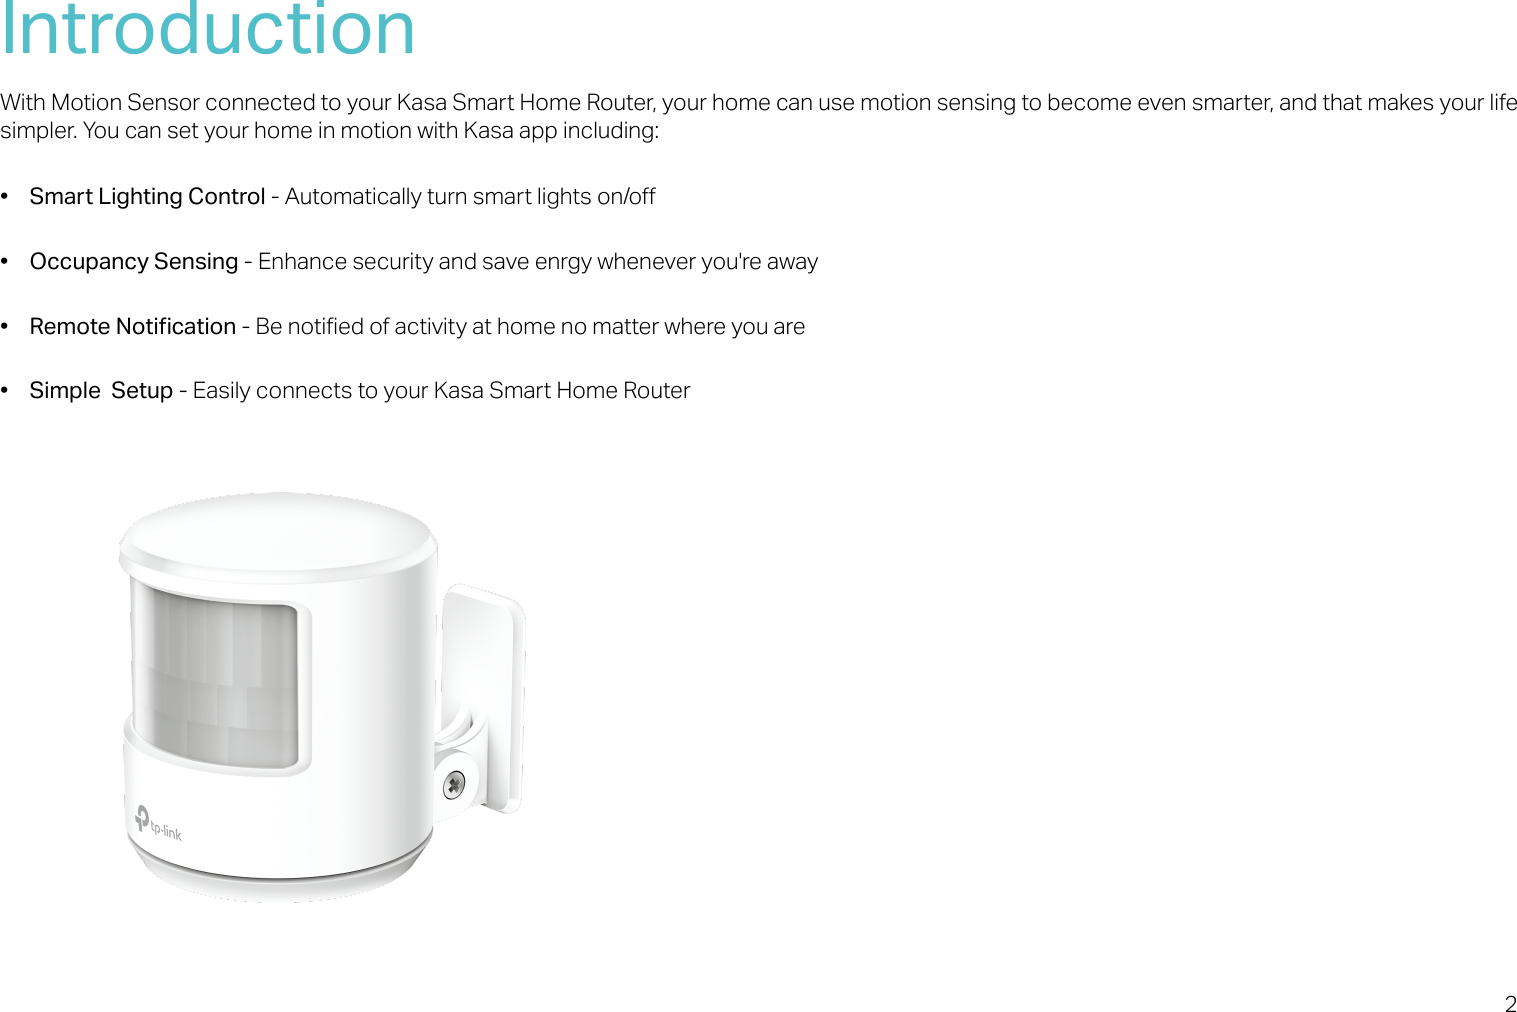 2IntroductionWith Motion Sensor connected to your Kasa Smart Home Router, your home can use motion sensing to become even smarter, and that makes your life simpler. You can set your home in motion with Kasa app including:• Smart Lighting Control - Automatically turn smart lights on/o• Occupancy Sensing - Enhance security and save enrgy whenever you&apos;re away•Remote Notication - Be notied of activity at home no matter where you are• Simple  Setup - Easily connects to your Kasa Smart Home Router